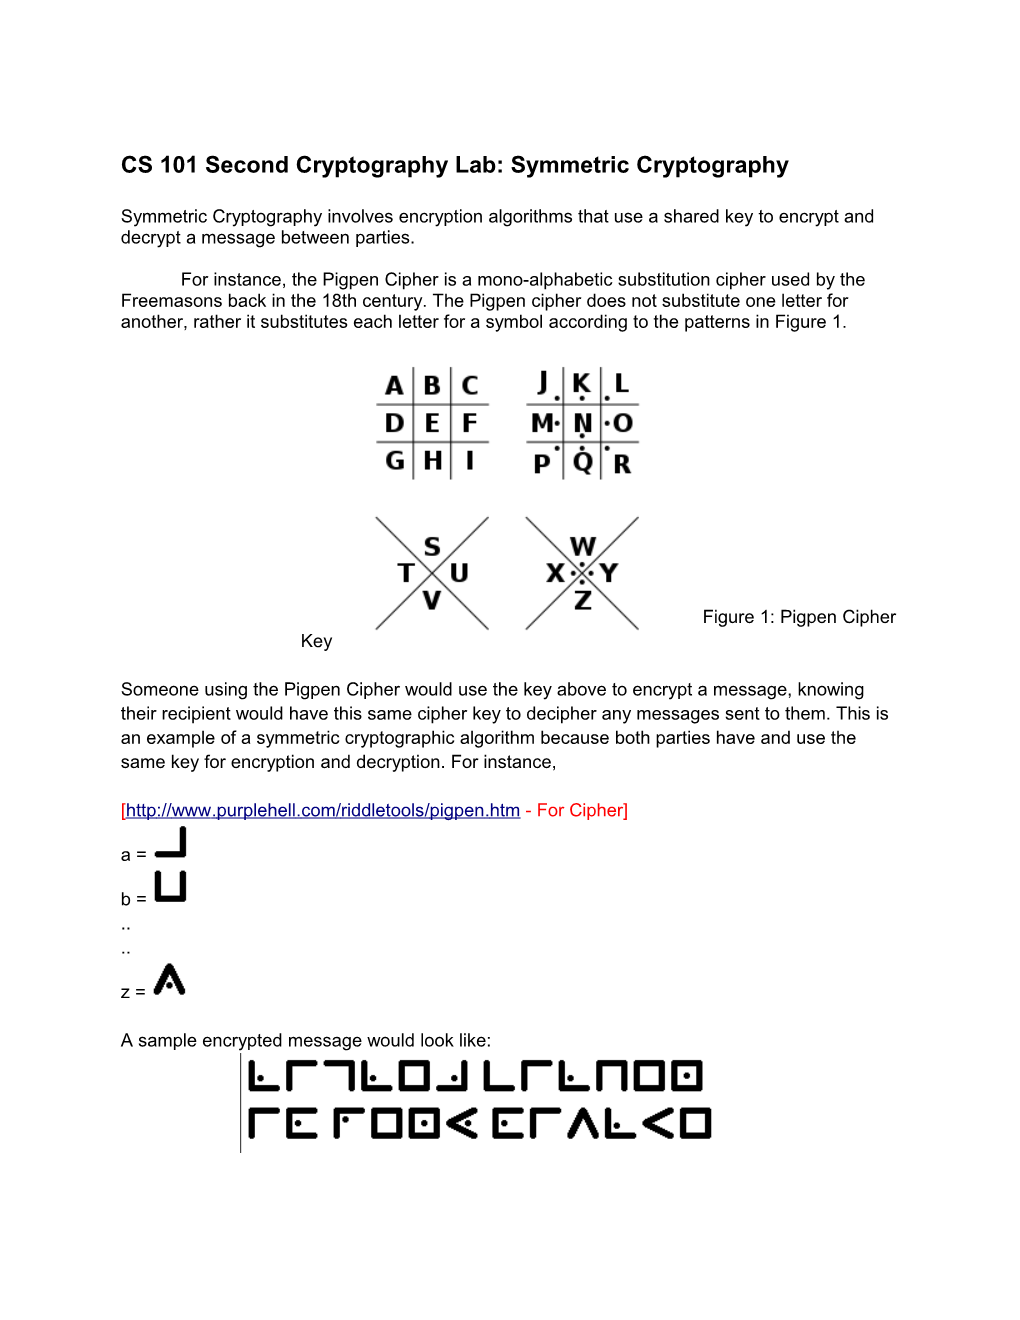 CS 101 Second Cryptography Lab: Symmetric Cryptography